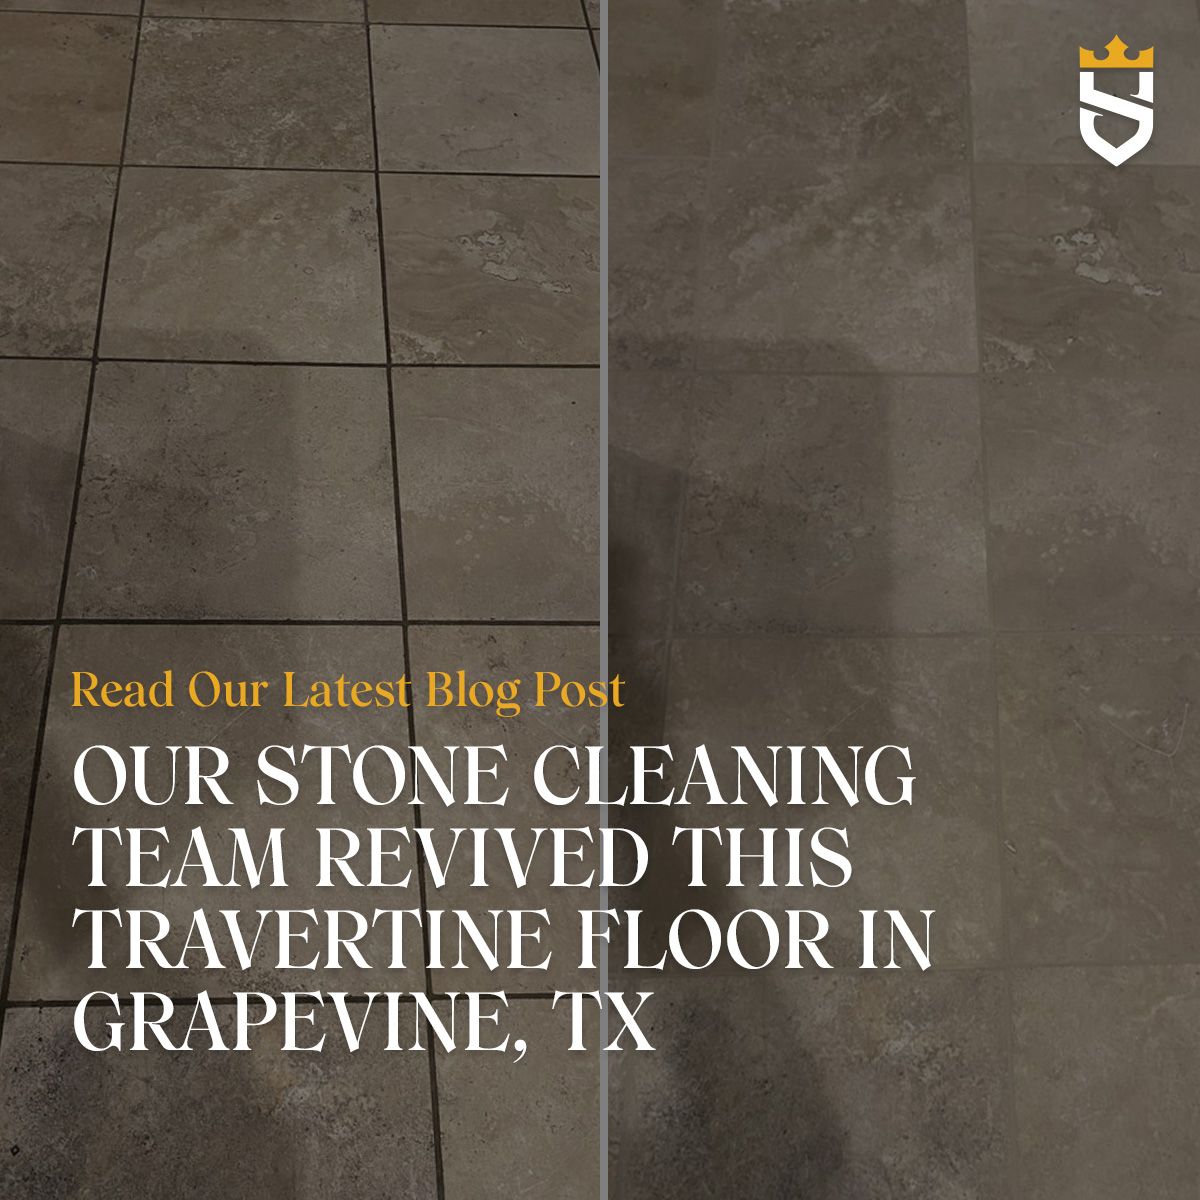 Our Stone Cleaning Team Revived This Travertine Floor in Grapevine, TX